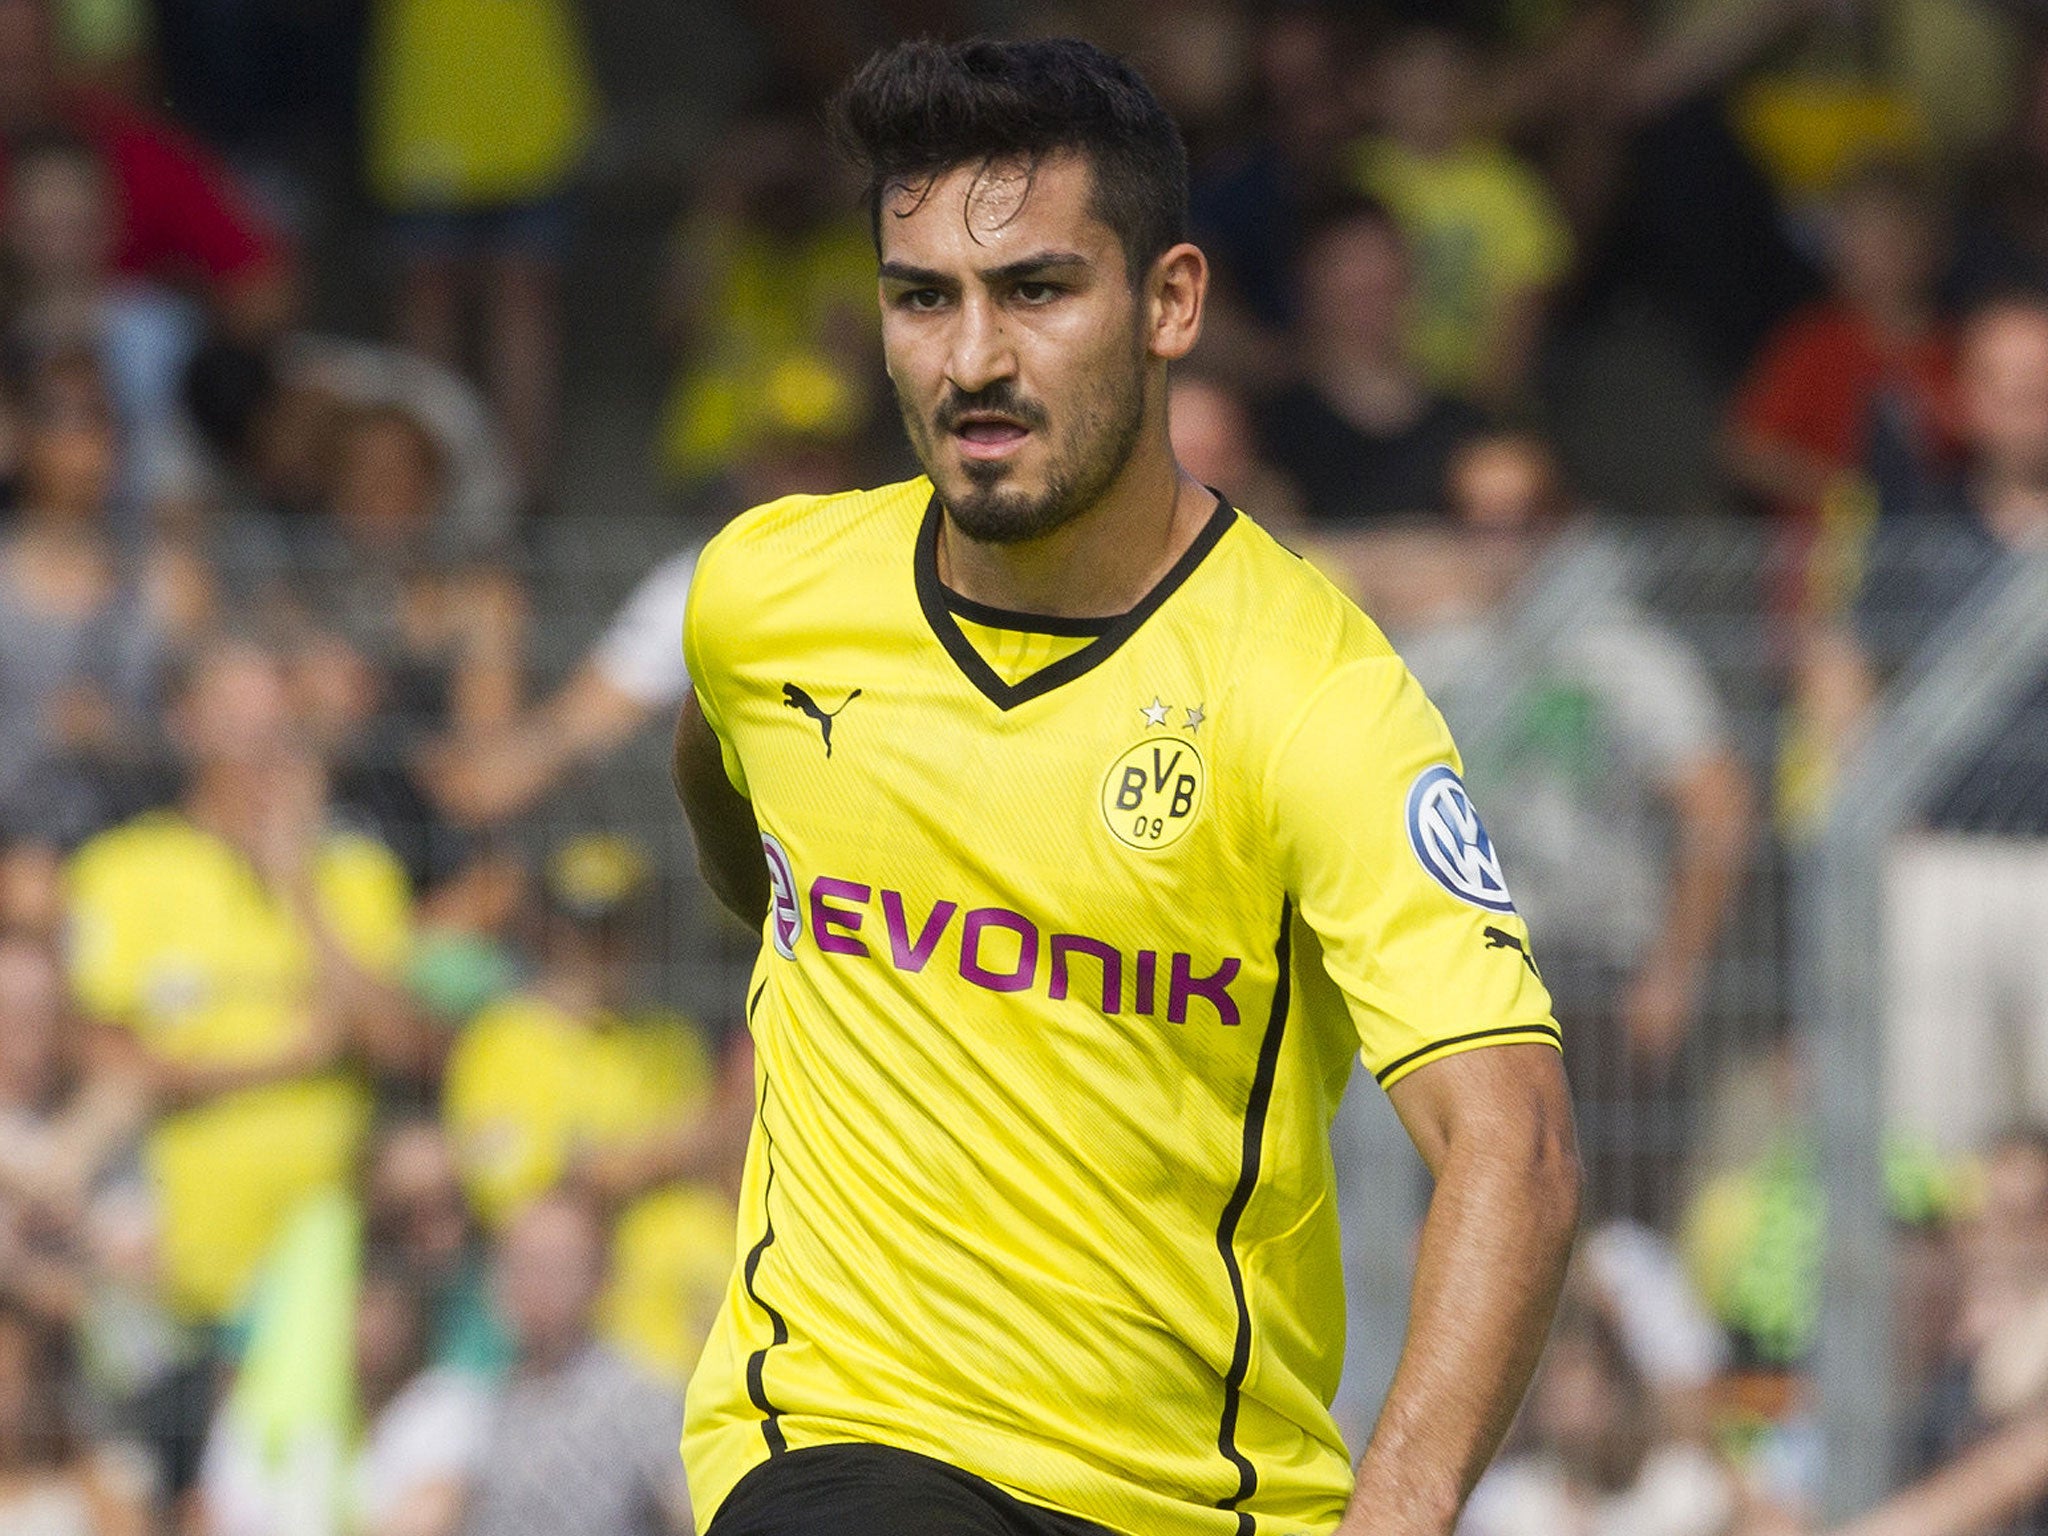 Ilkay Gundogan could be the answer to Manchester United's midfield problems